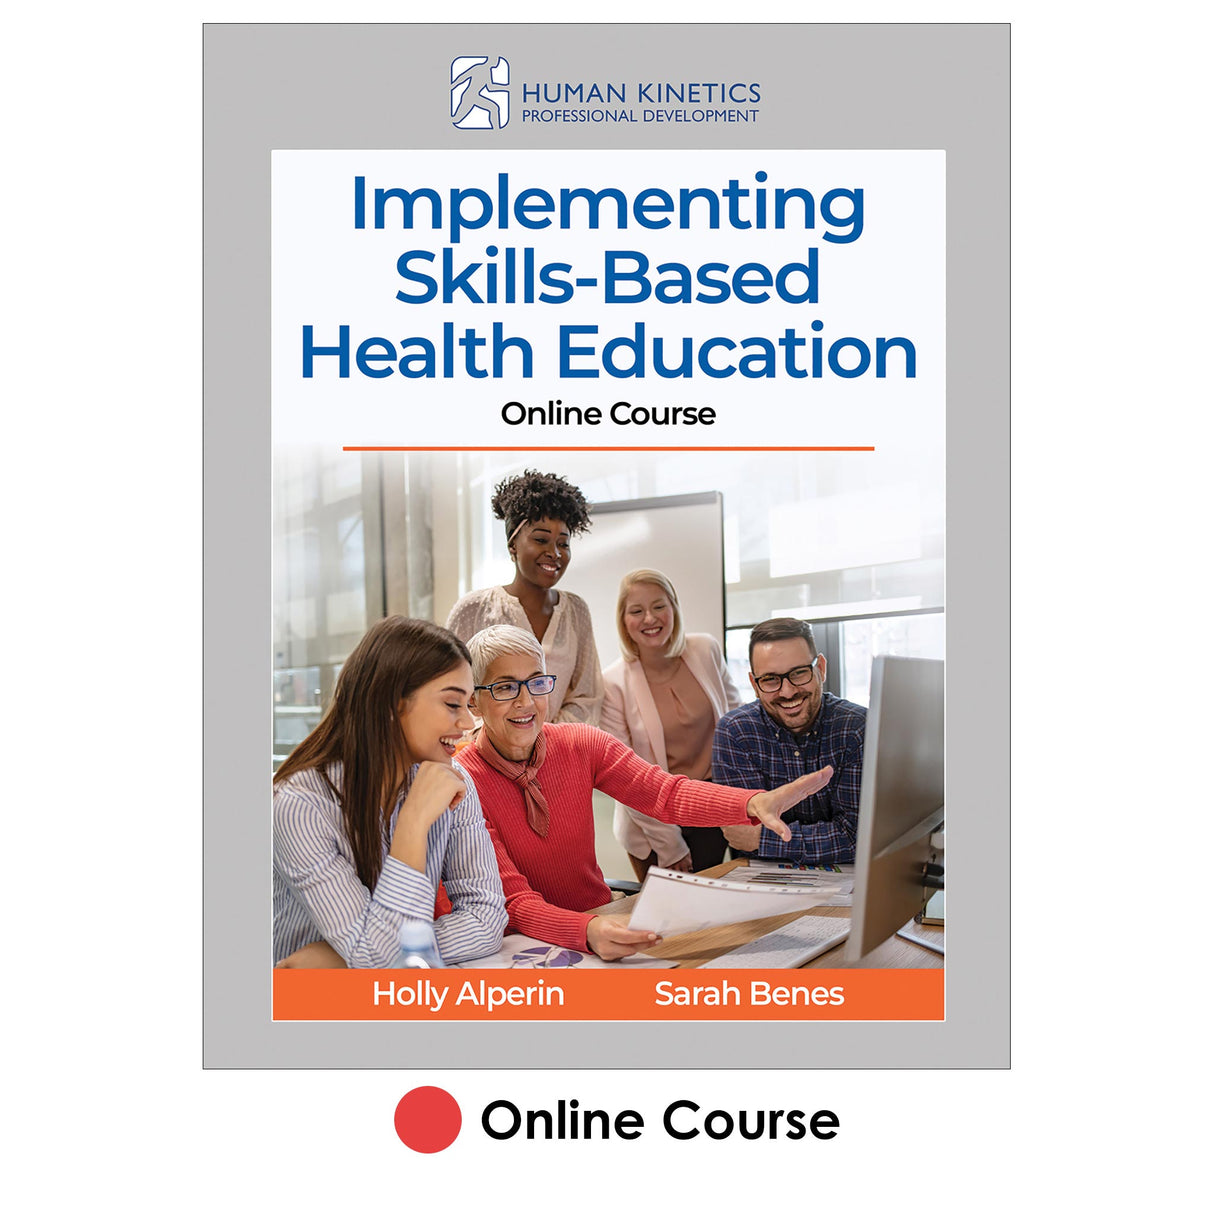 Implementing Skills-Based Health Education Online Course